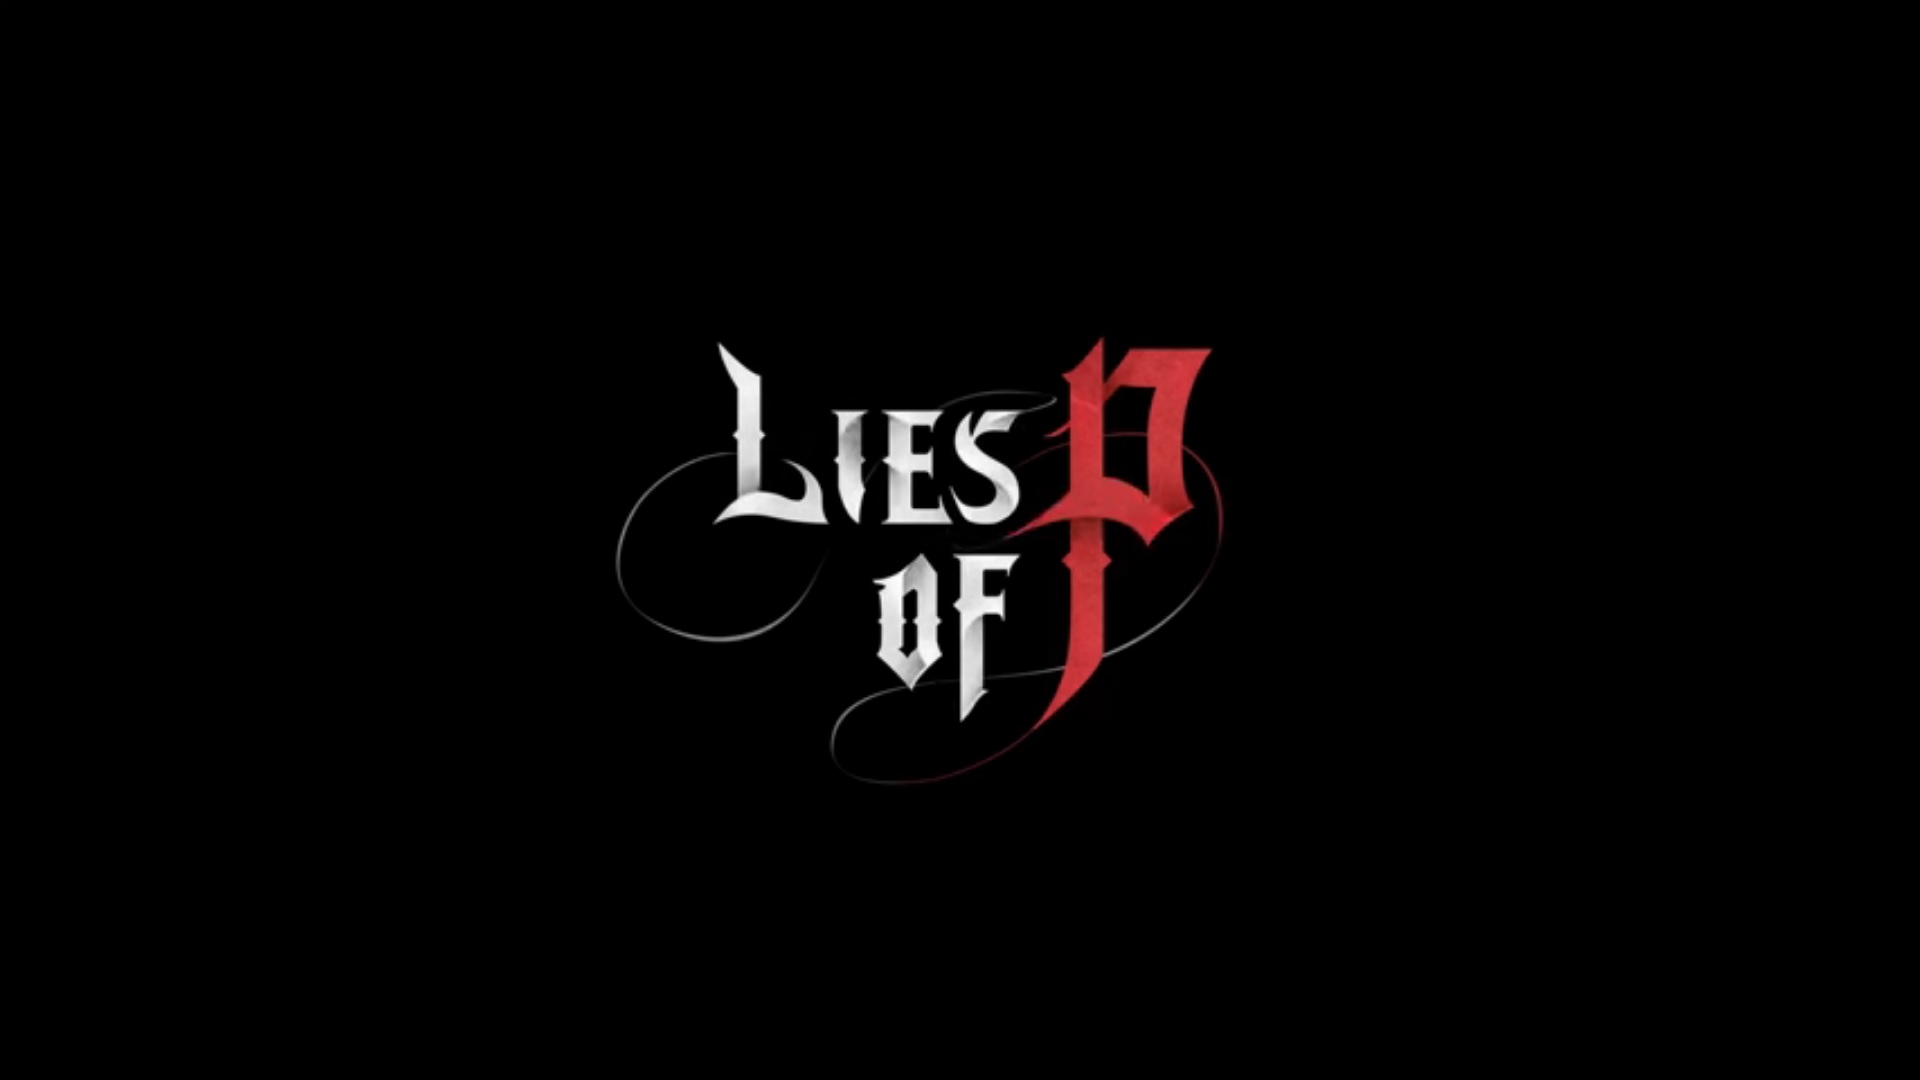 Lies of P Gets New Gameplay Trailer Reveals Combat and More